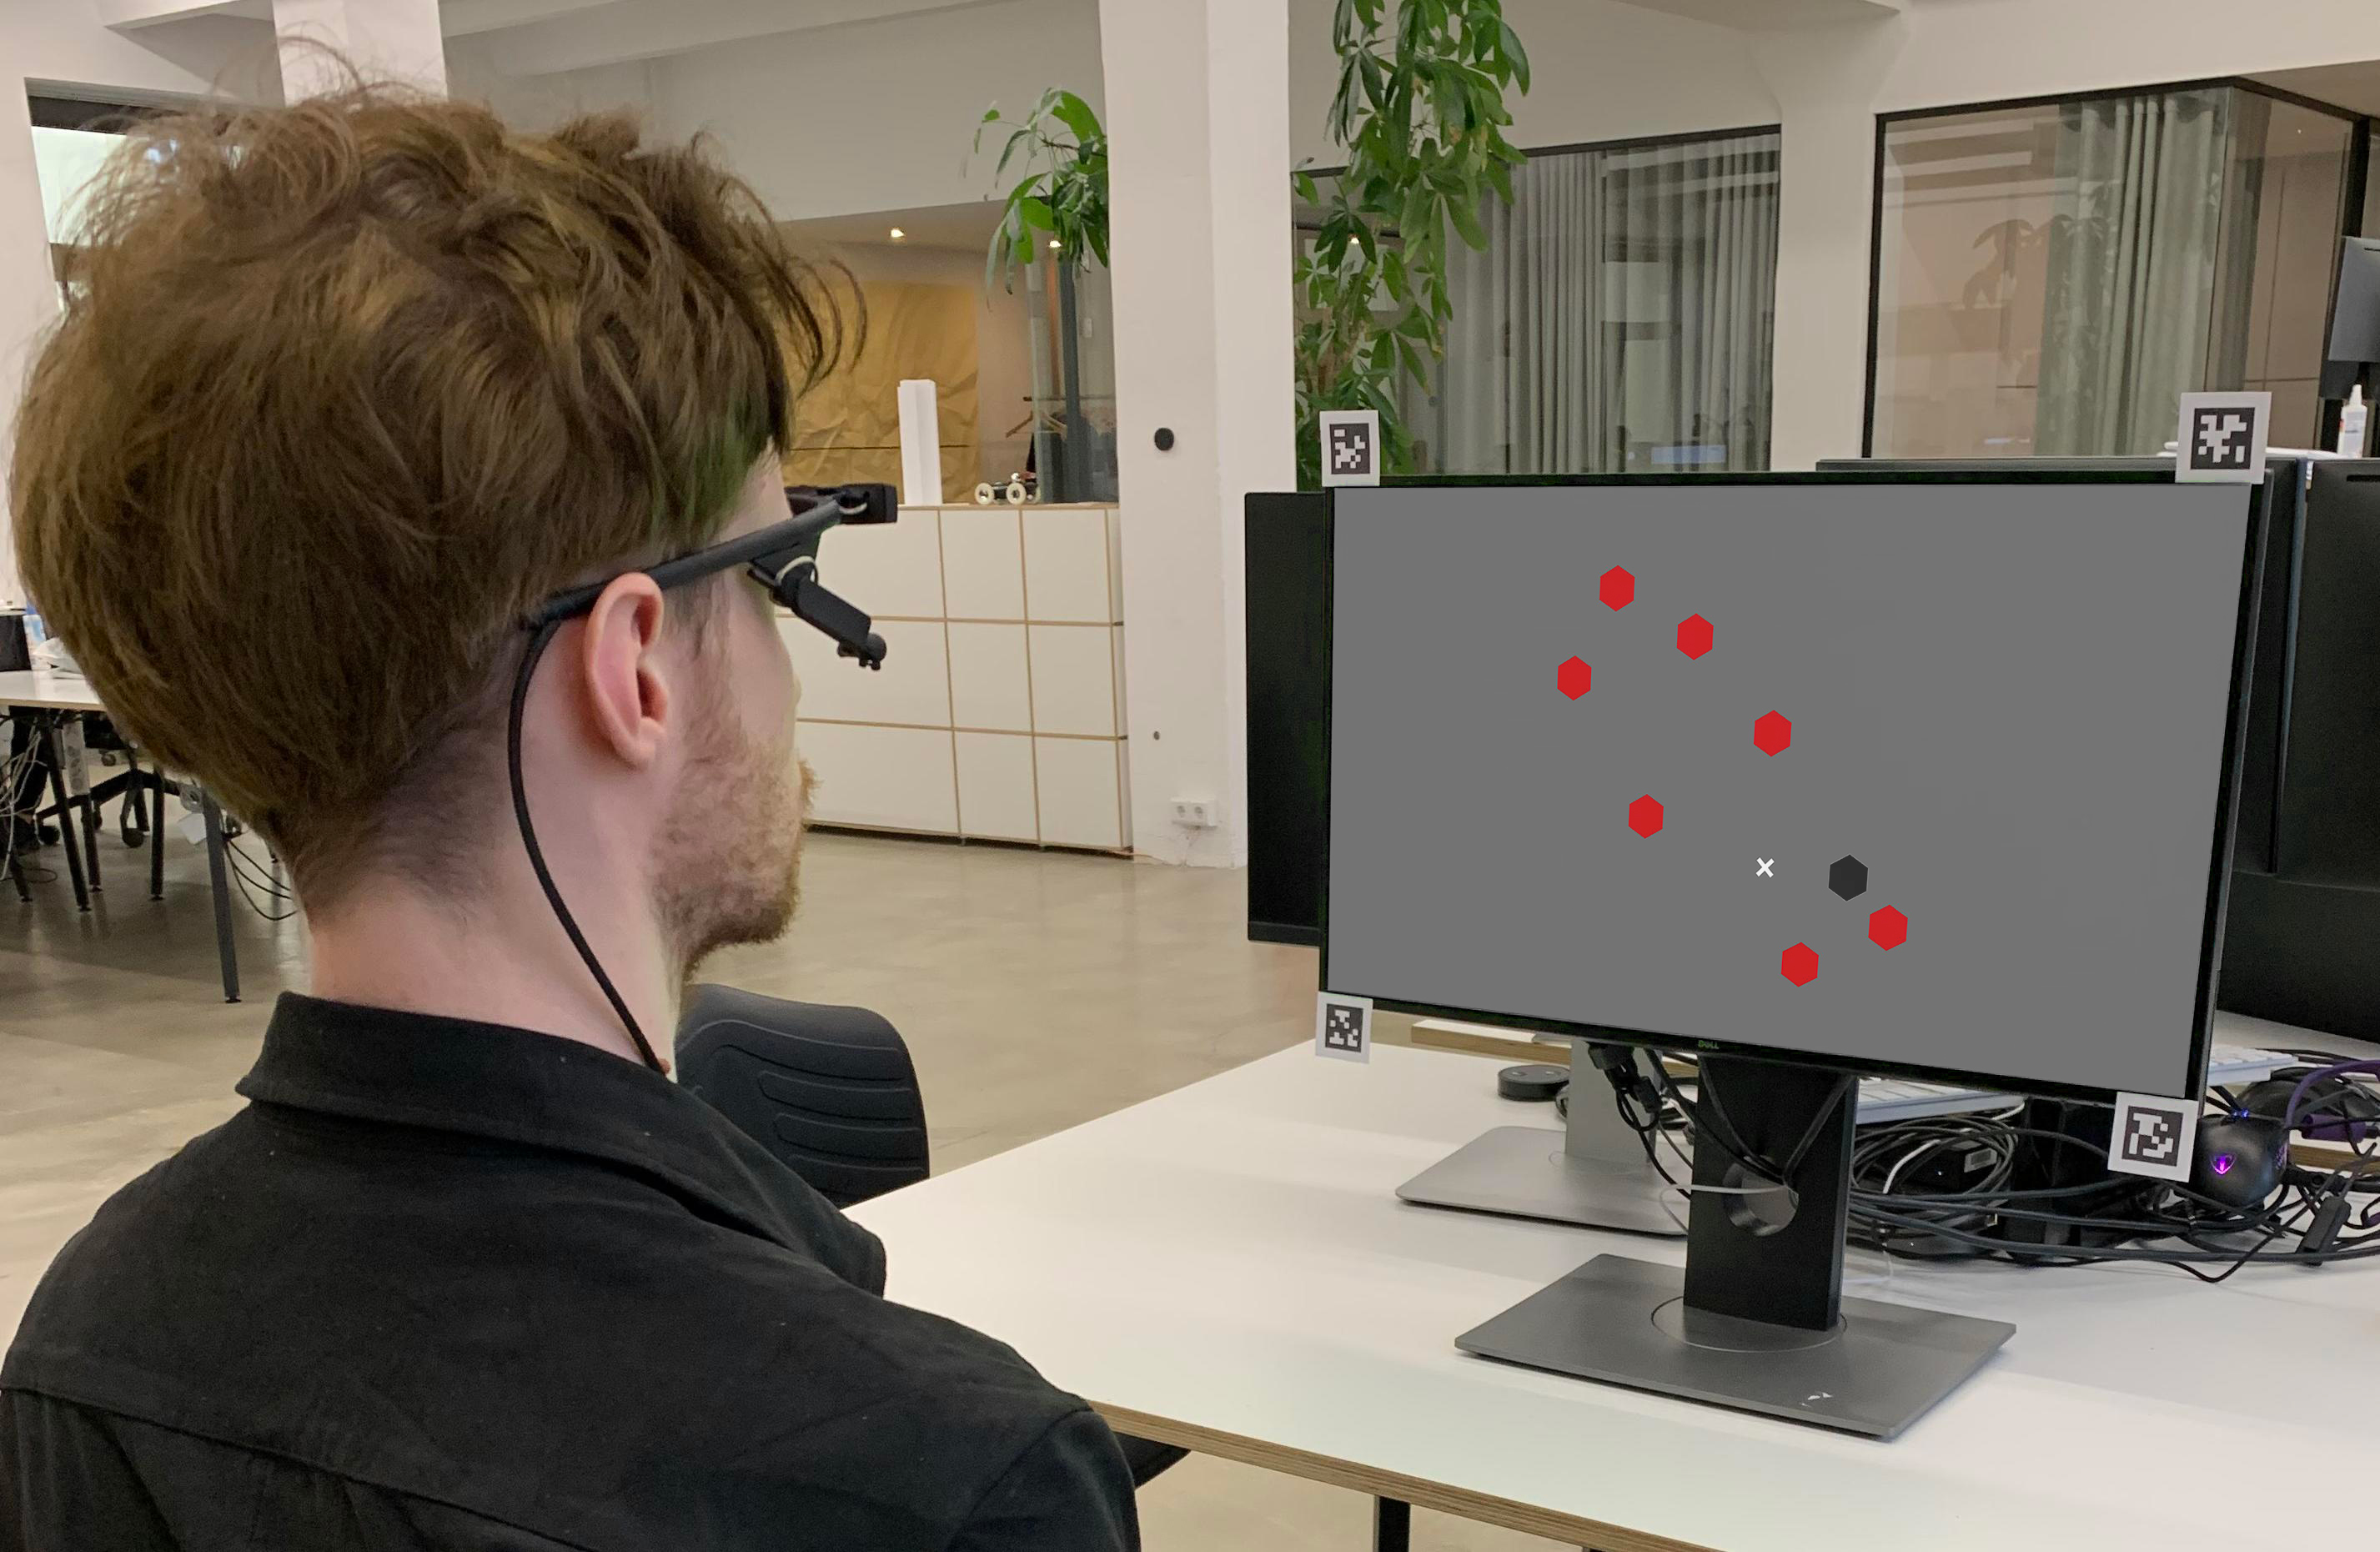 Subject wearing Pupil Core headset, looking at a Computer screen setup with AprilTag markers